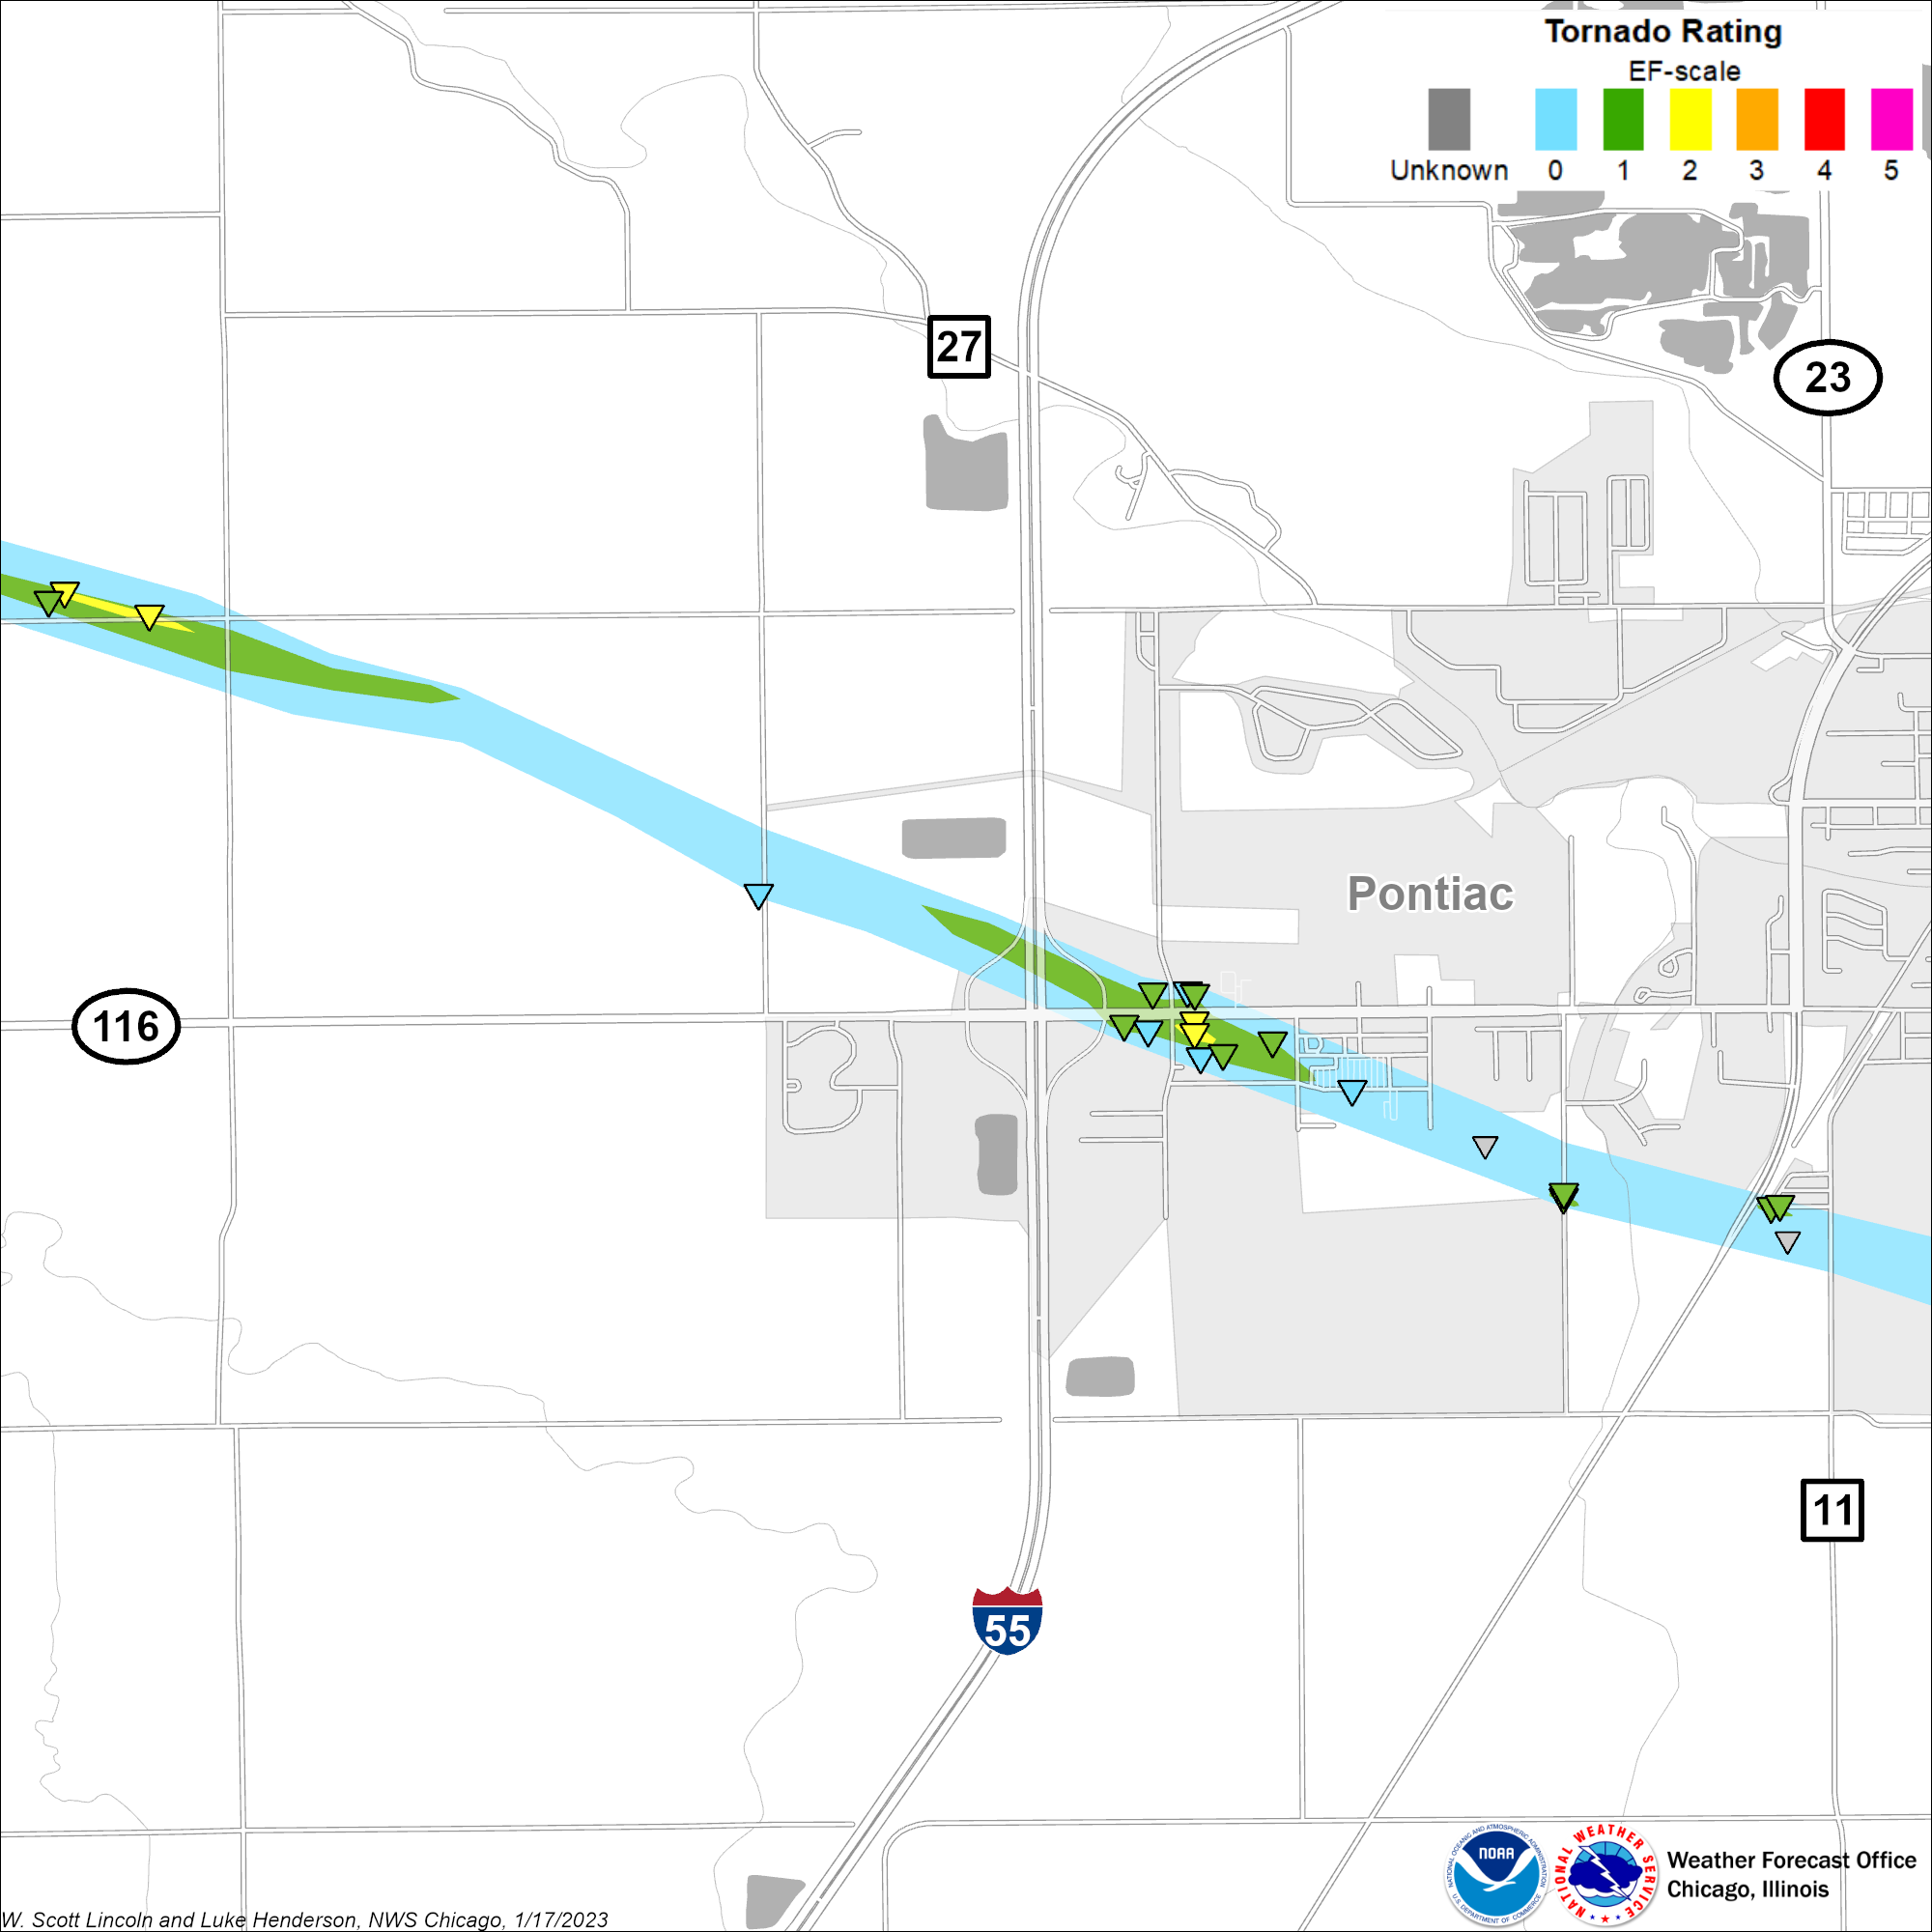 Map showing track of the Pontiac tornado, zoomed in on an area of higher-end damage on the west side of Pontiac